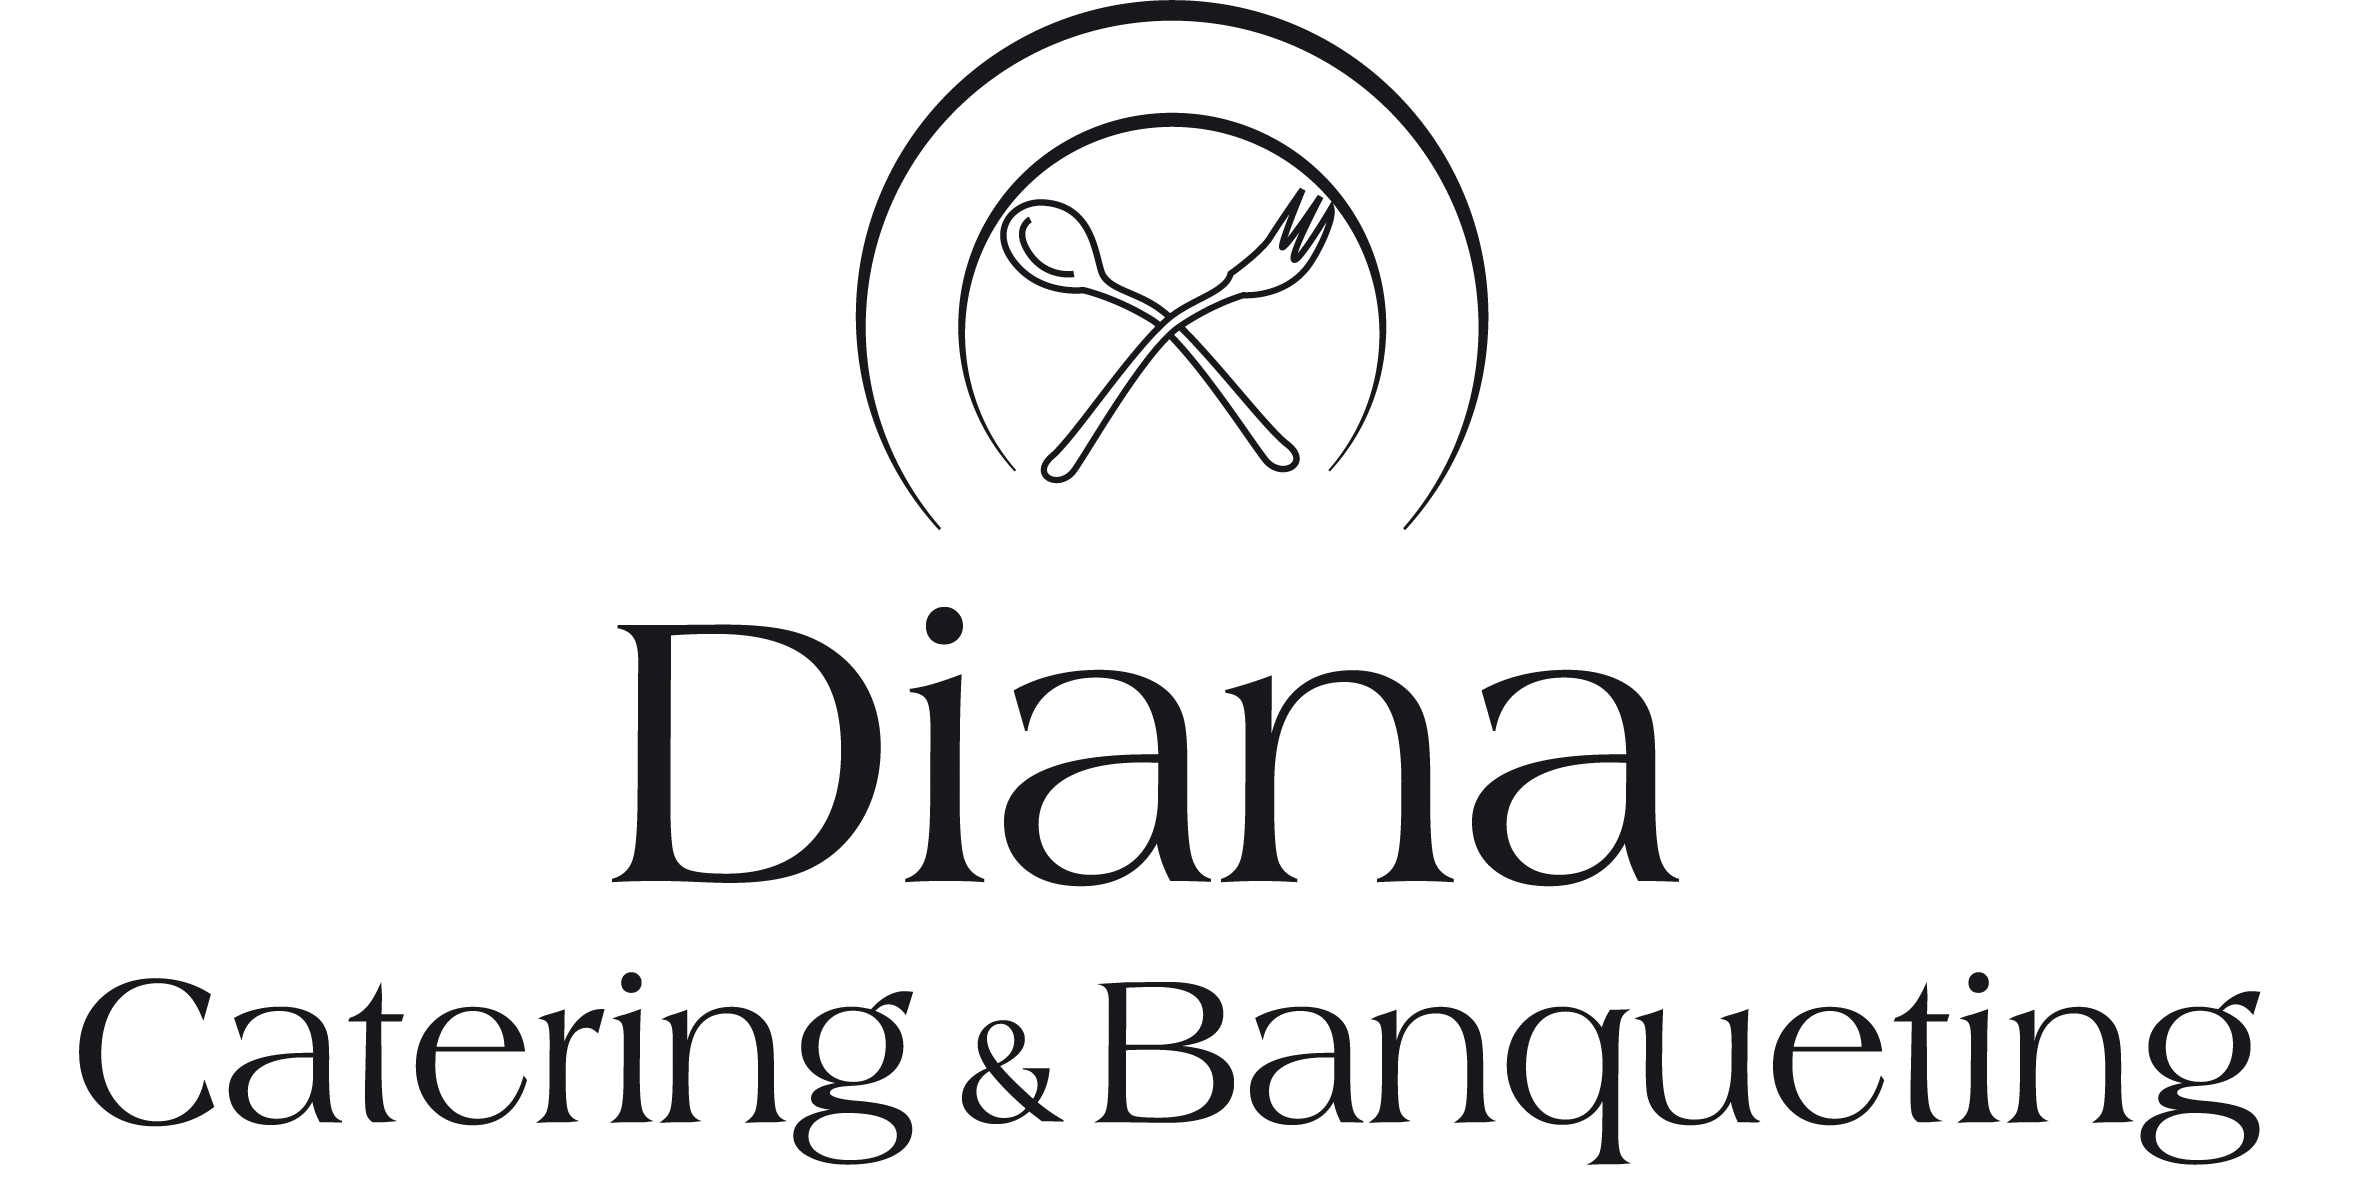 Diana Catering